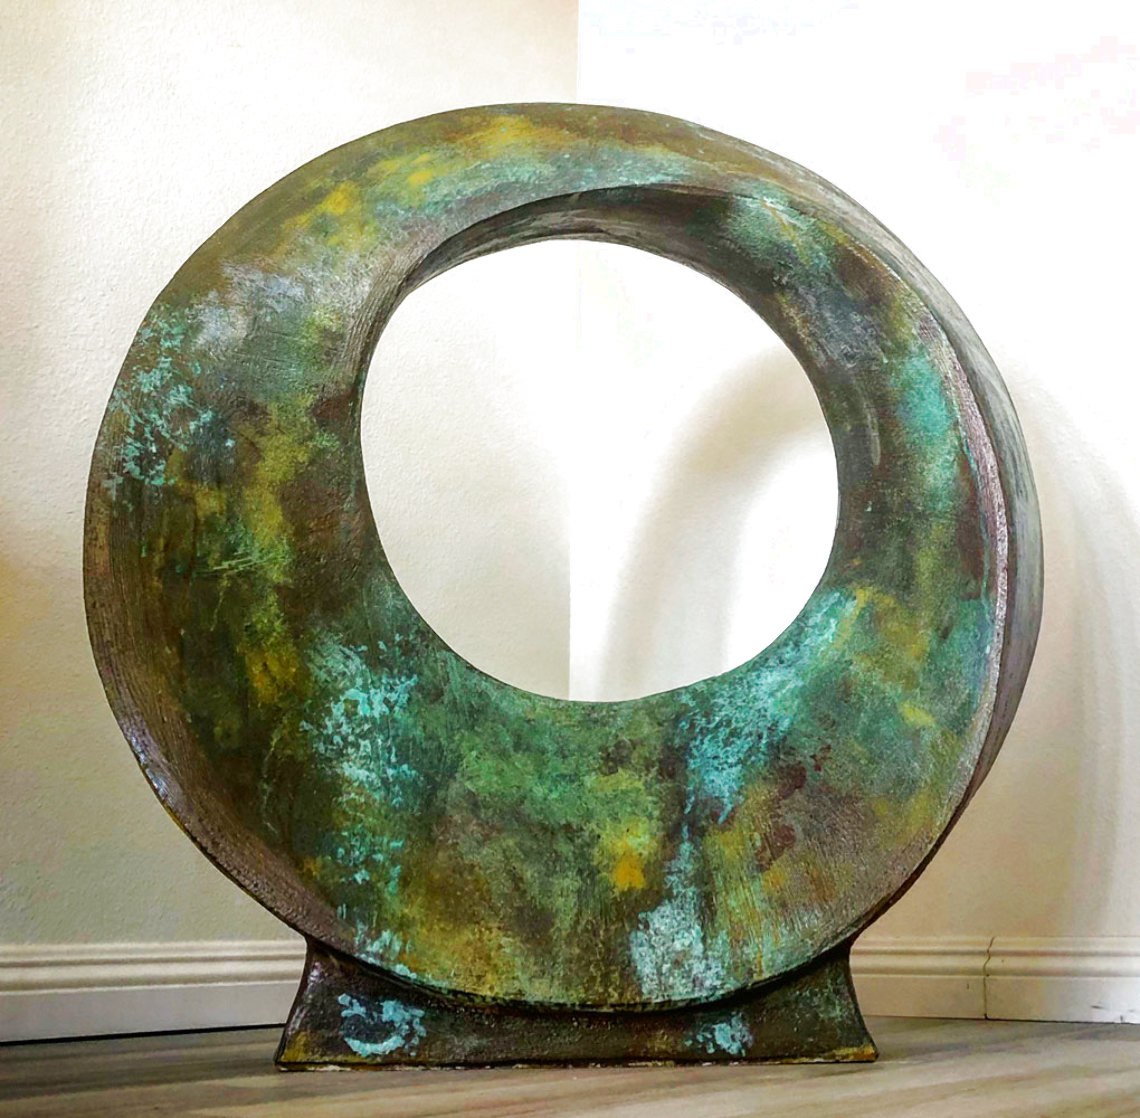 Infinity Ring Ceramic and Iron Sculpture Unique 2017  80 in Sculpture by Charles Sherman